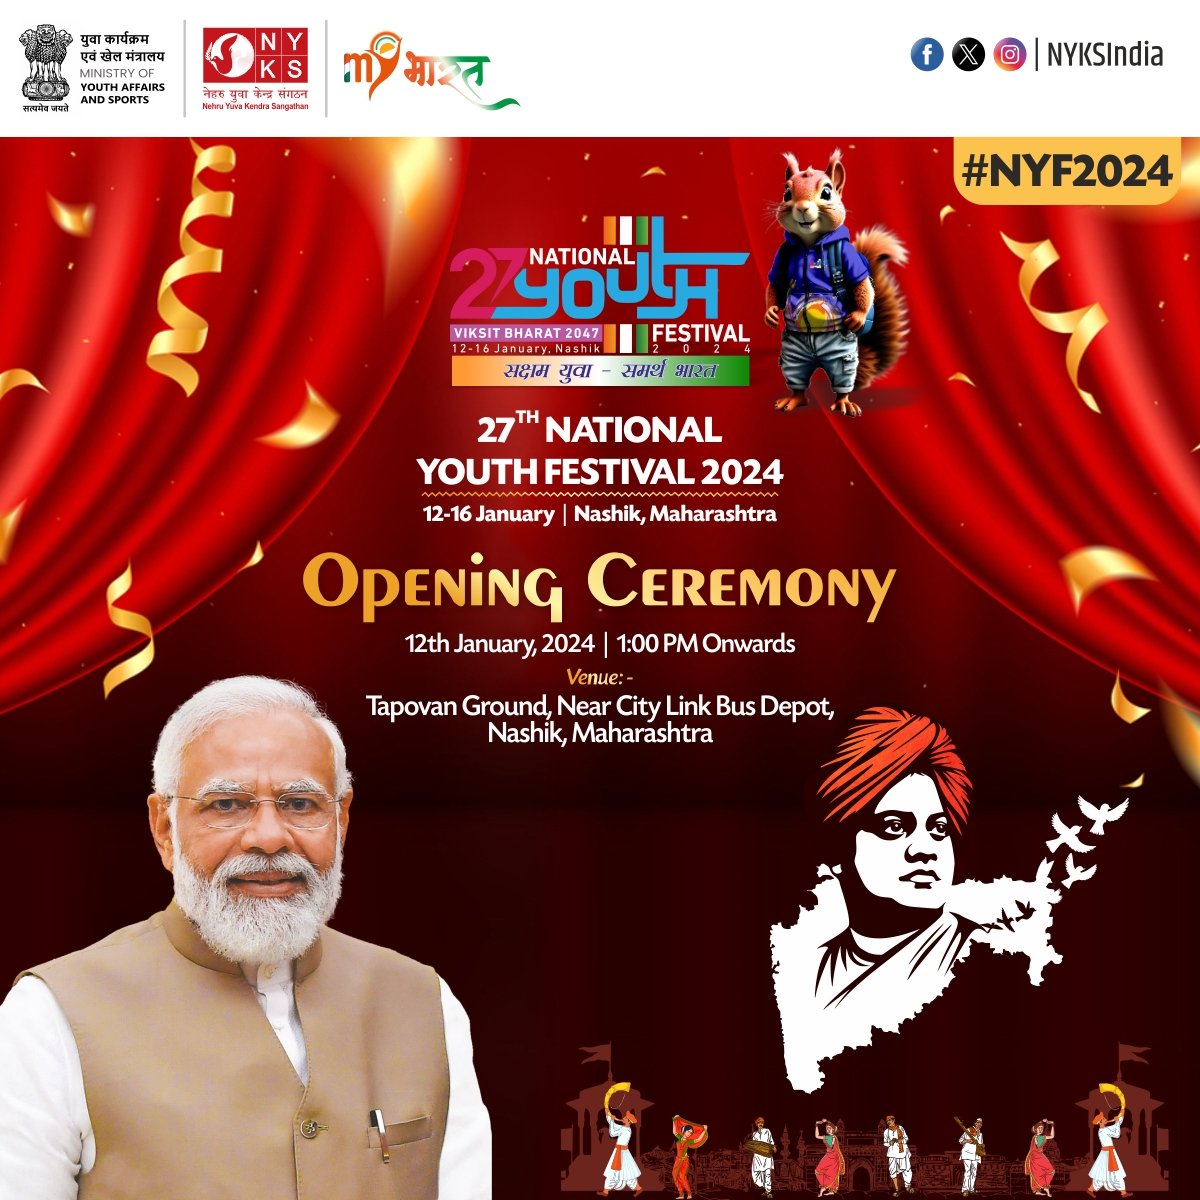 History in the making! 🎉 Honored to witness the inauguration of the 27th #NationalYouthFestival2024 in Nashik, Maharashtra, by the visionary leader, Shri Narendra Modi Ji, Hon'ble Prime Minister. A celebration of youth, unity, and limitless potential. #NYF2024 #Nashik